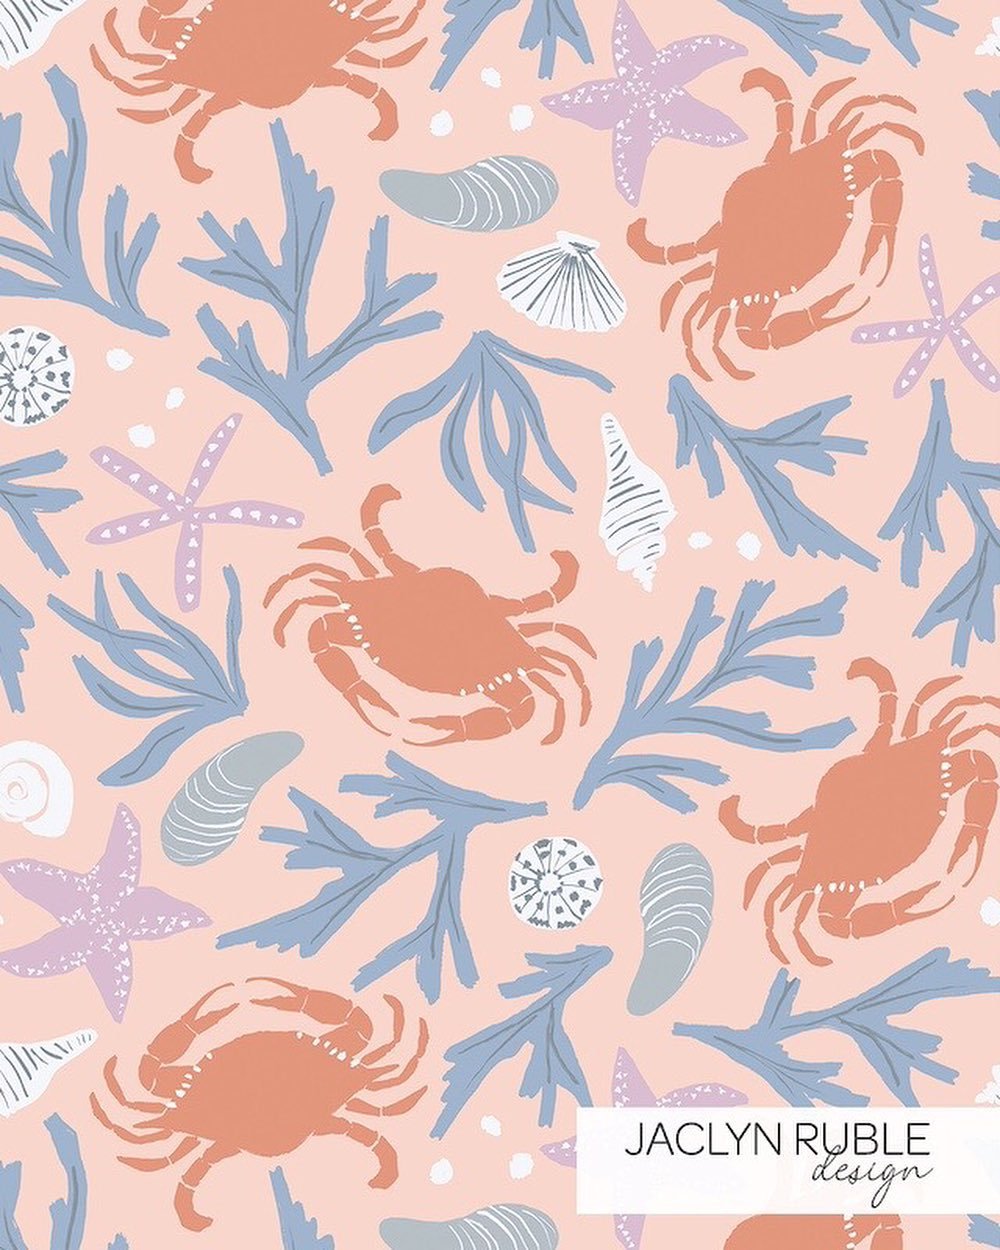 Y&rsquo;all loved the Coastal Crabs in this bright colorway! 🦀🐚☀️ I love love this design and could see it on all beachy things! Bathing suit, towel, koozie, beach shirt, bag, etc.. 

My newest collection Seaside has lots of mix and match designs a